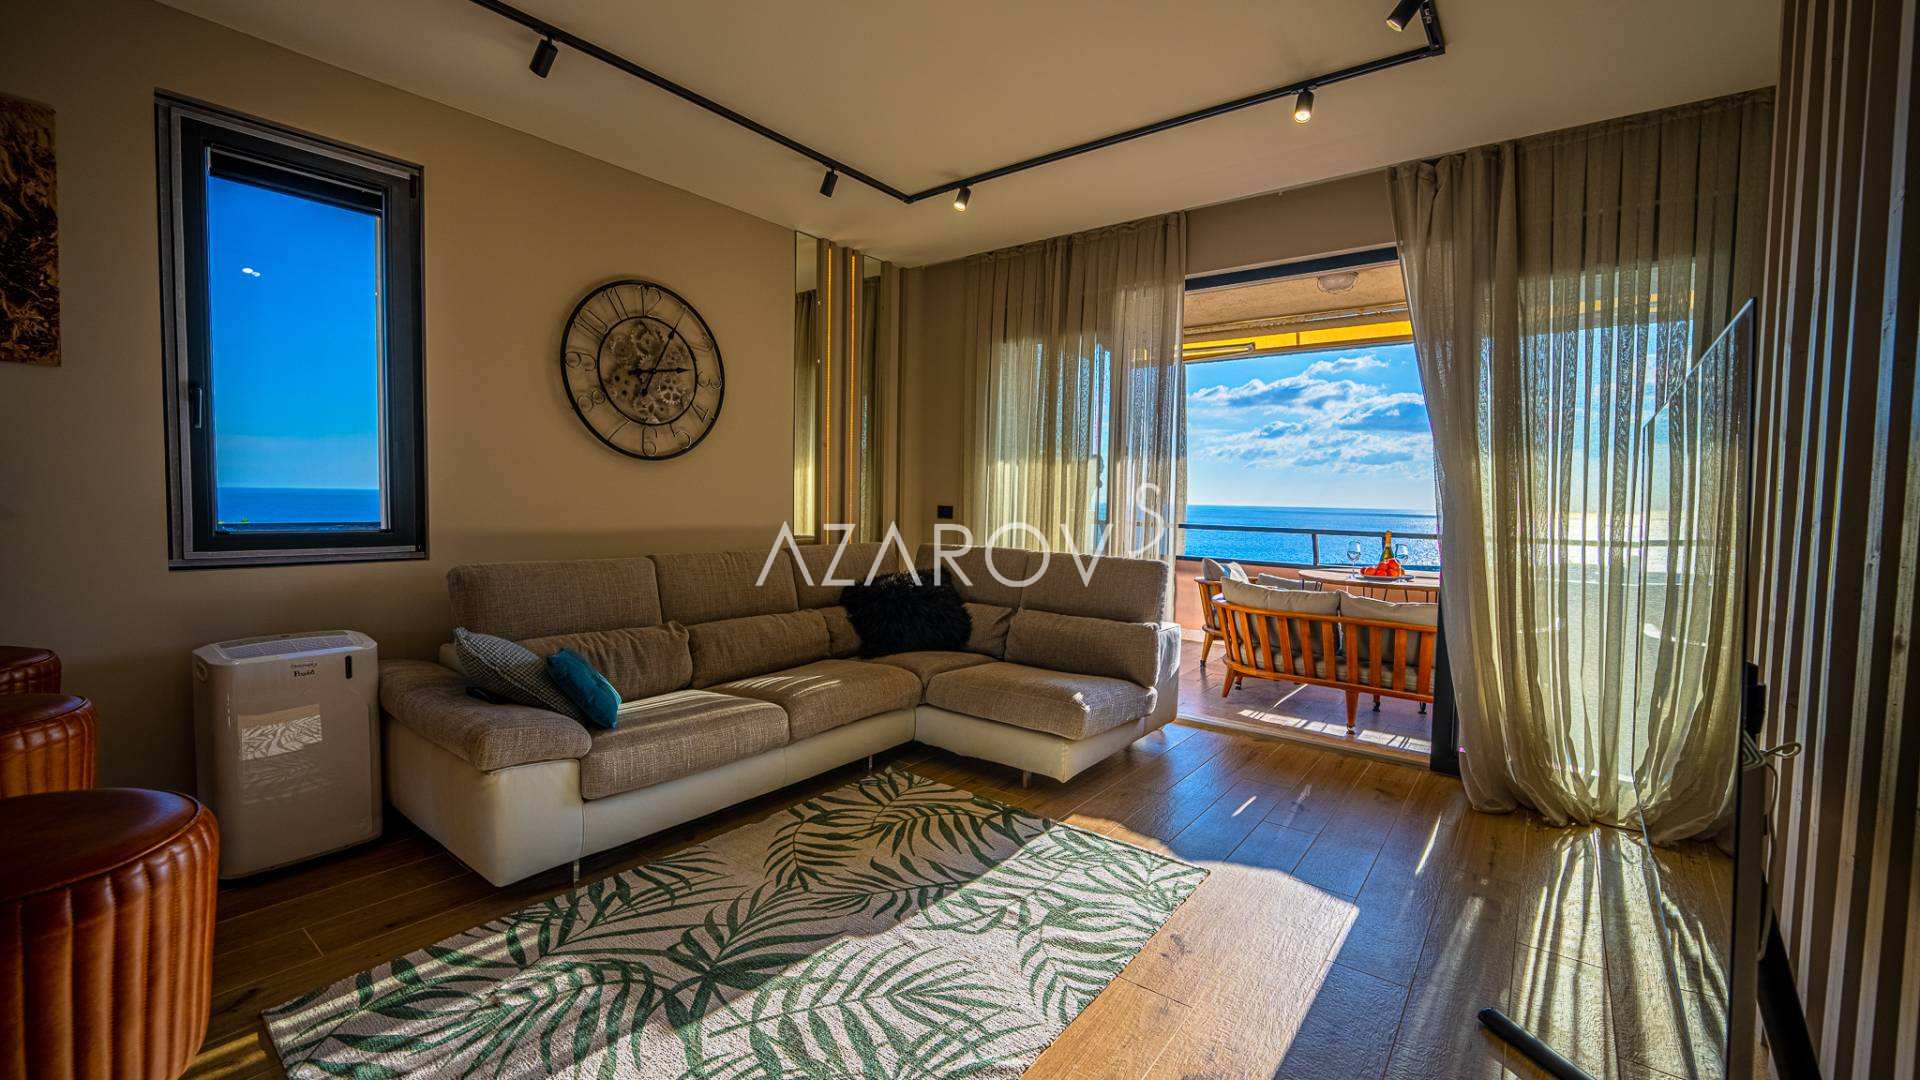 Neues Penthouse in Sanremo